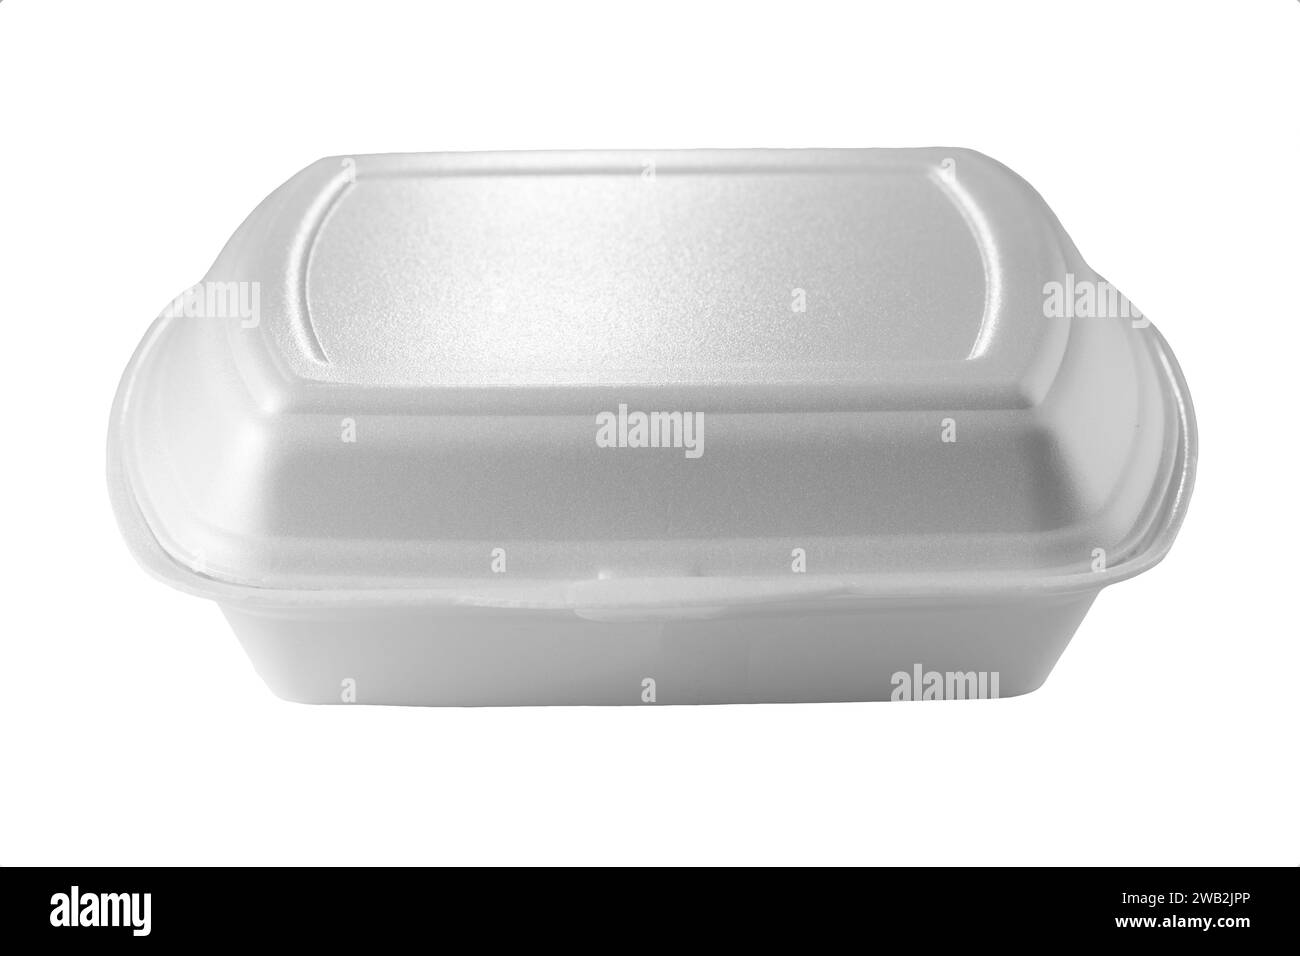 Food delivery container, white tray isolated on white background Stock Photo